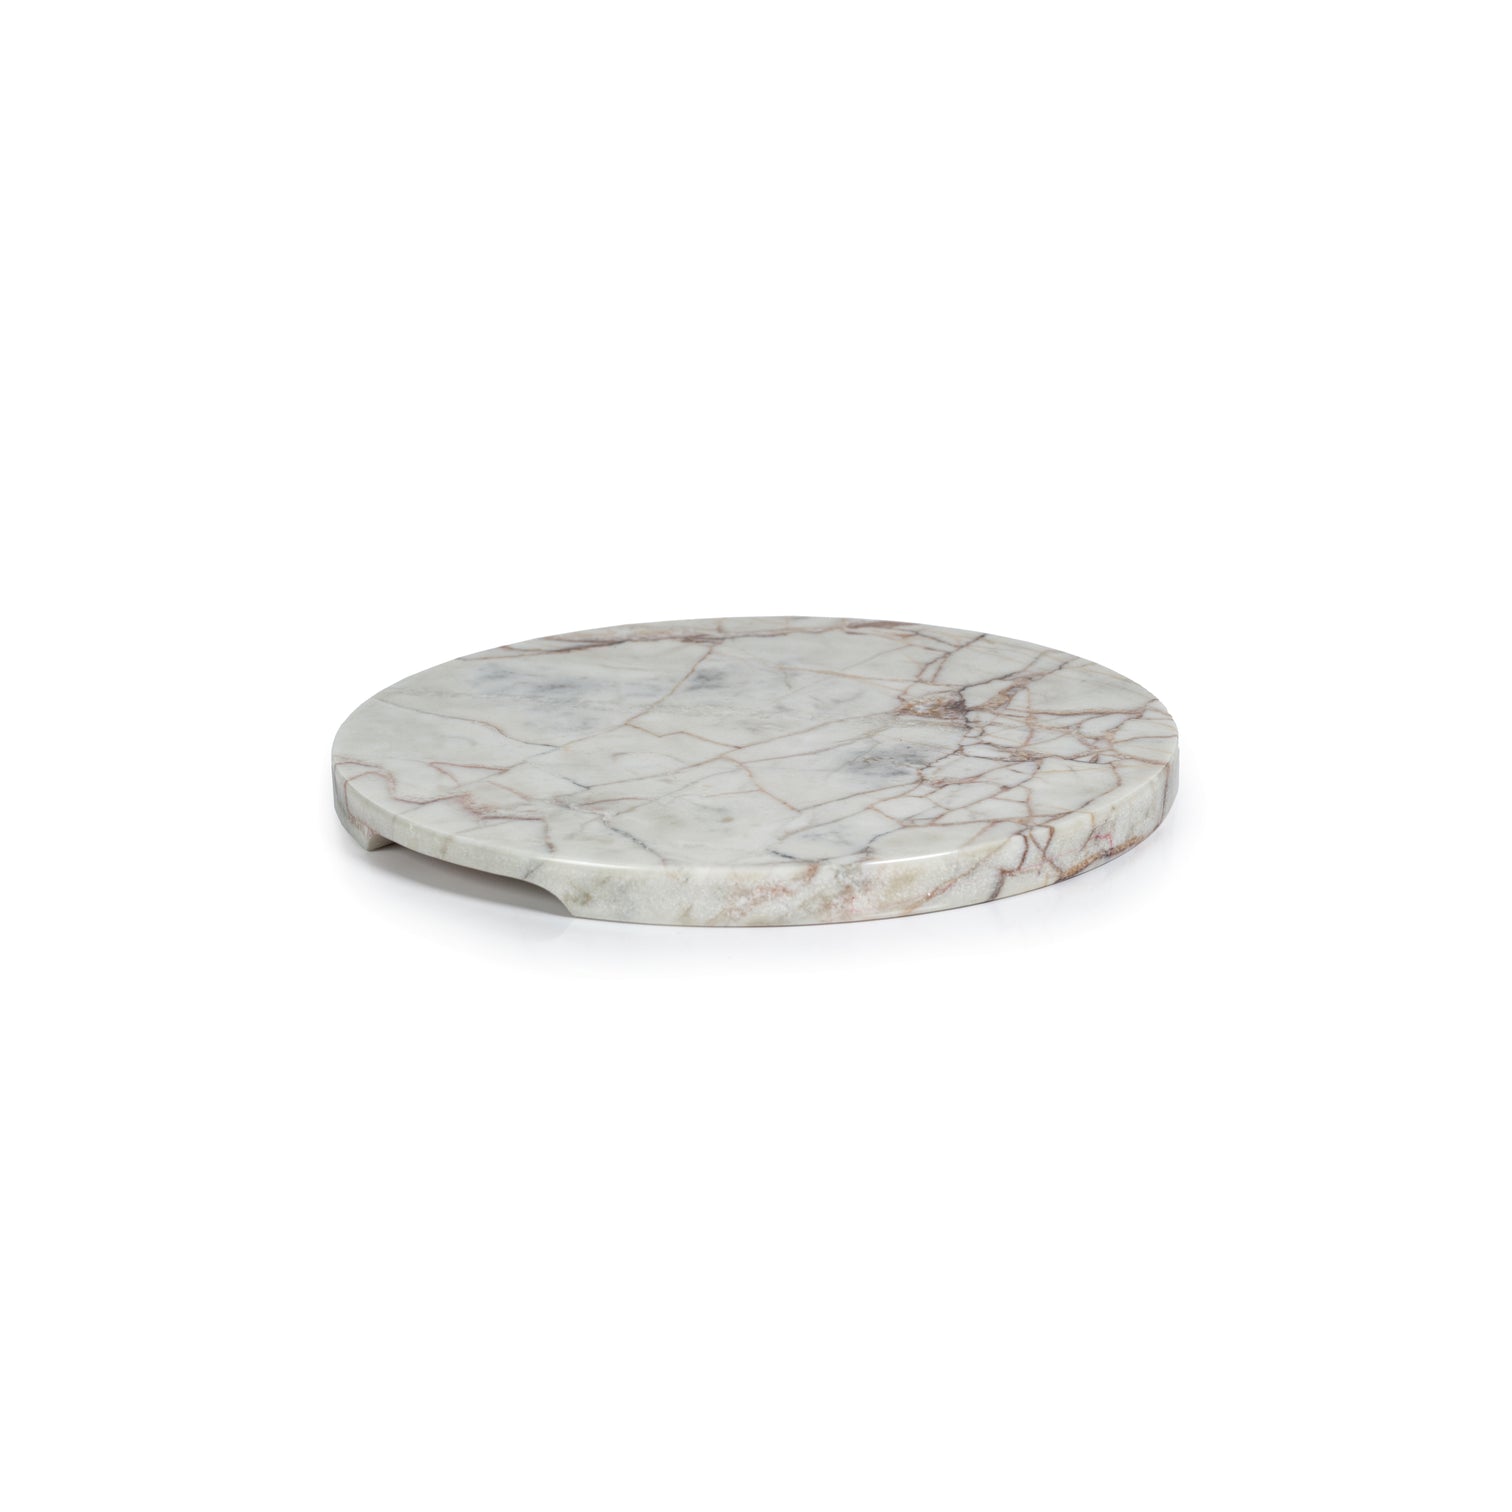 Rosso Verona Polished Marble Cheese & Charcuterie Board